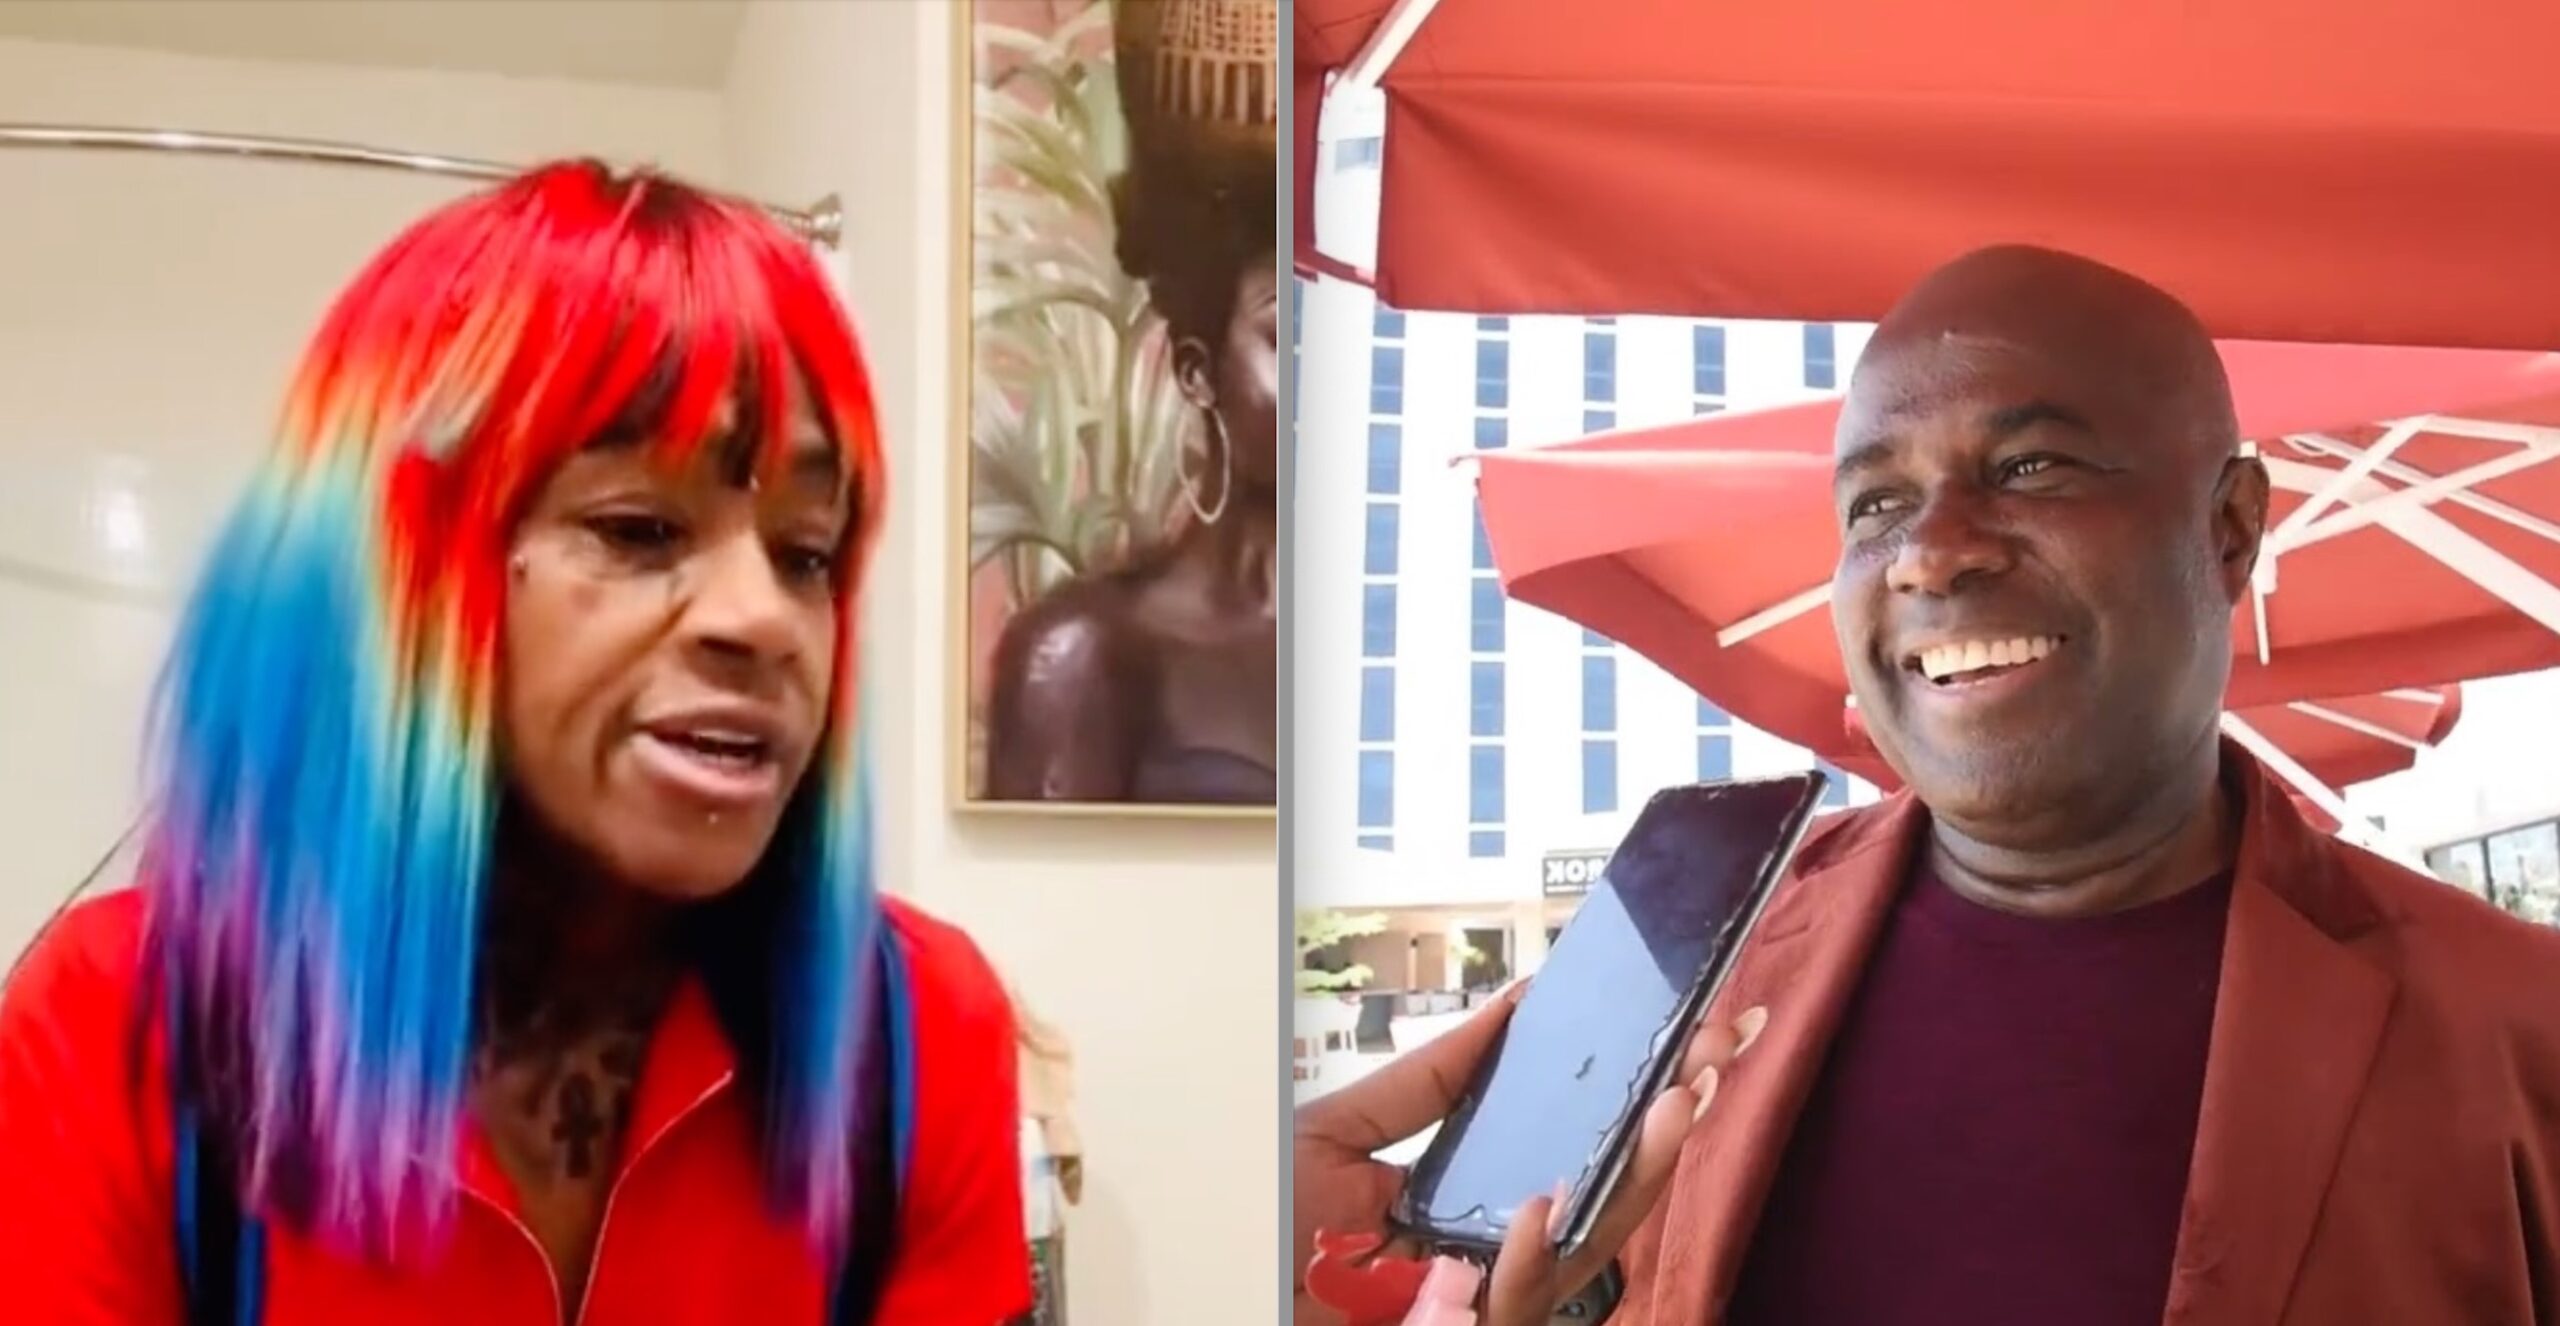 A'mari Calls Isiah Laing Asking Him "Kindly" to Book Her For Sting 2023 - Watch Videos